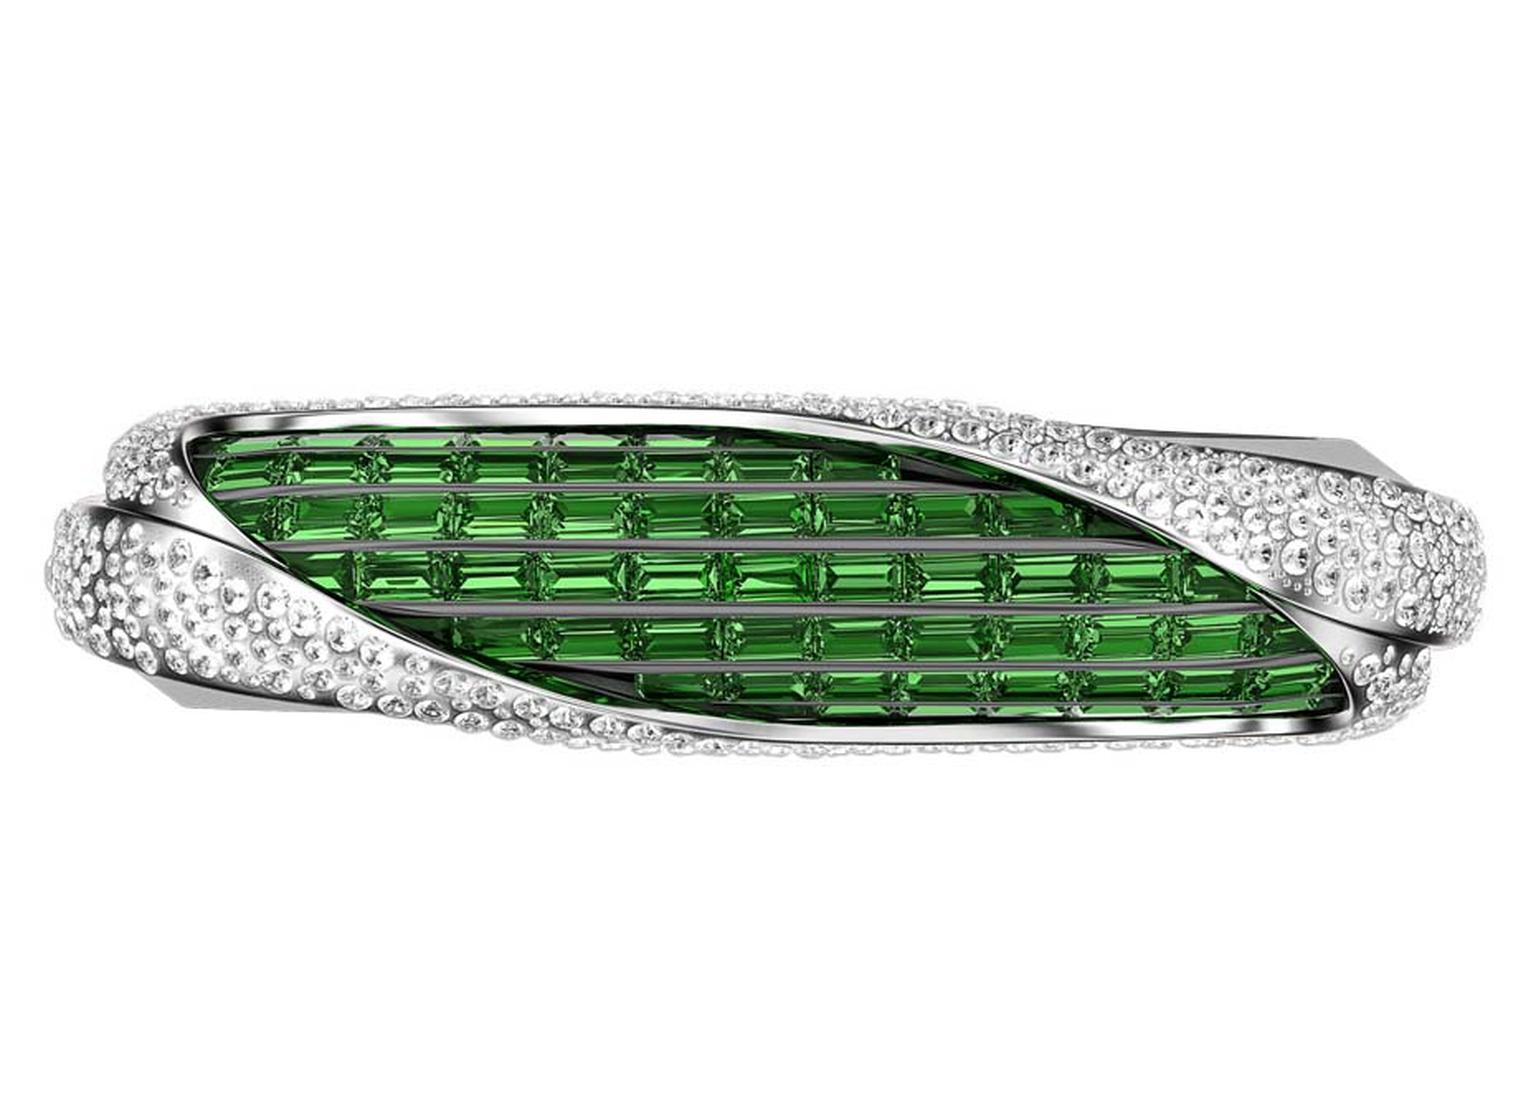 The Savelli Emerald Insane smartphone in white gold is set with 75 baguette-cut Gemfields emeralds (4.5ct) and approximately 870 brilliant-cut diamonds